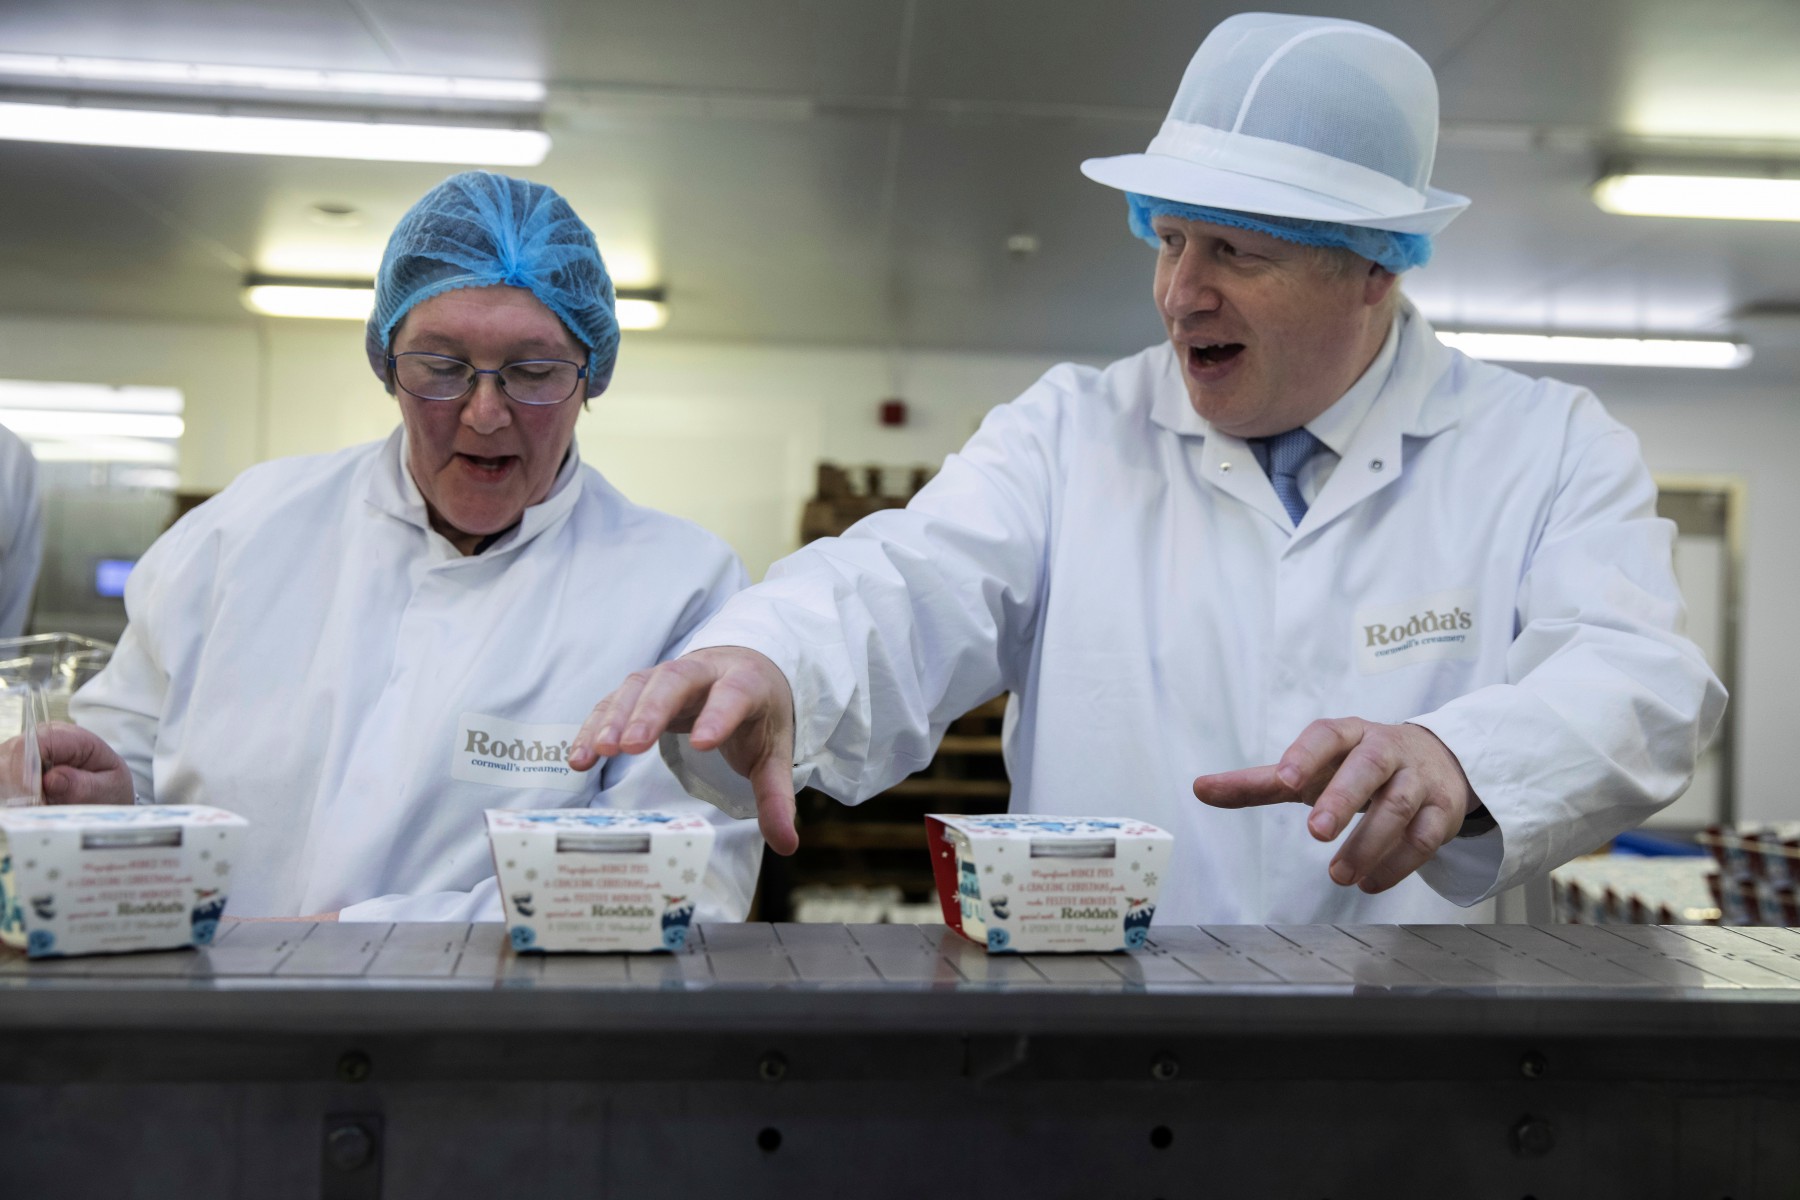 Boris revealed he puts jam before cream on a scone during a visit to Roddas Clotted Cream factory